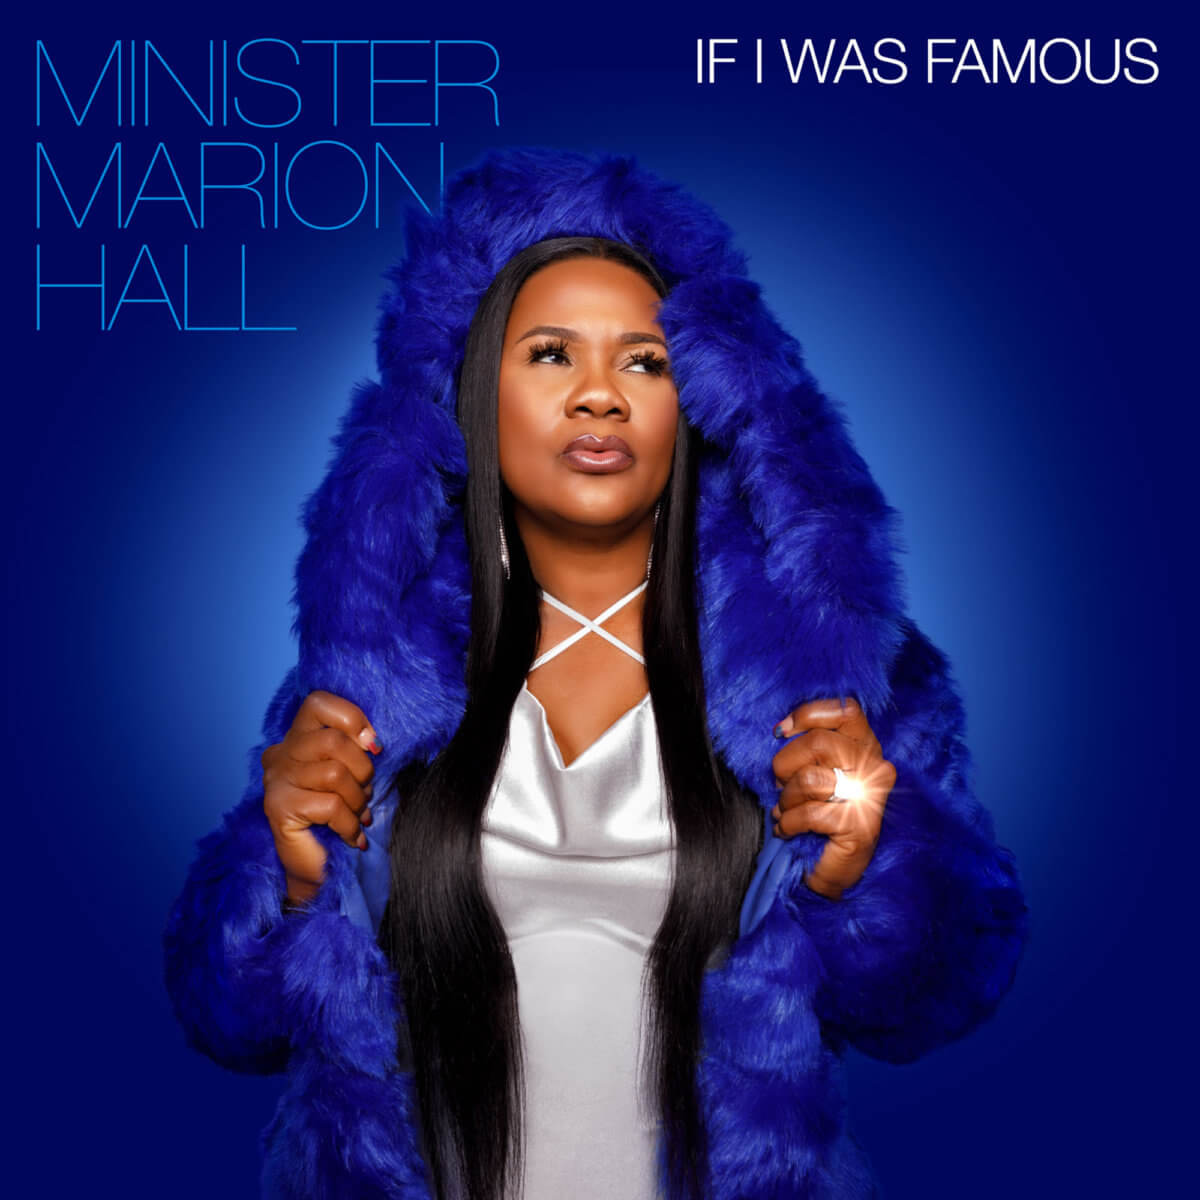 Marion-IfIWasFamous-UPDATED-cover